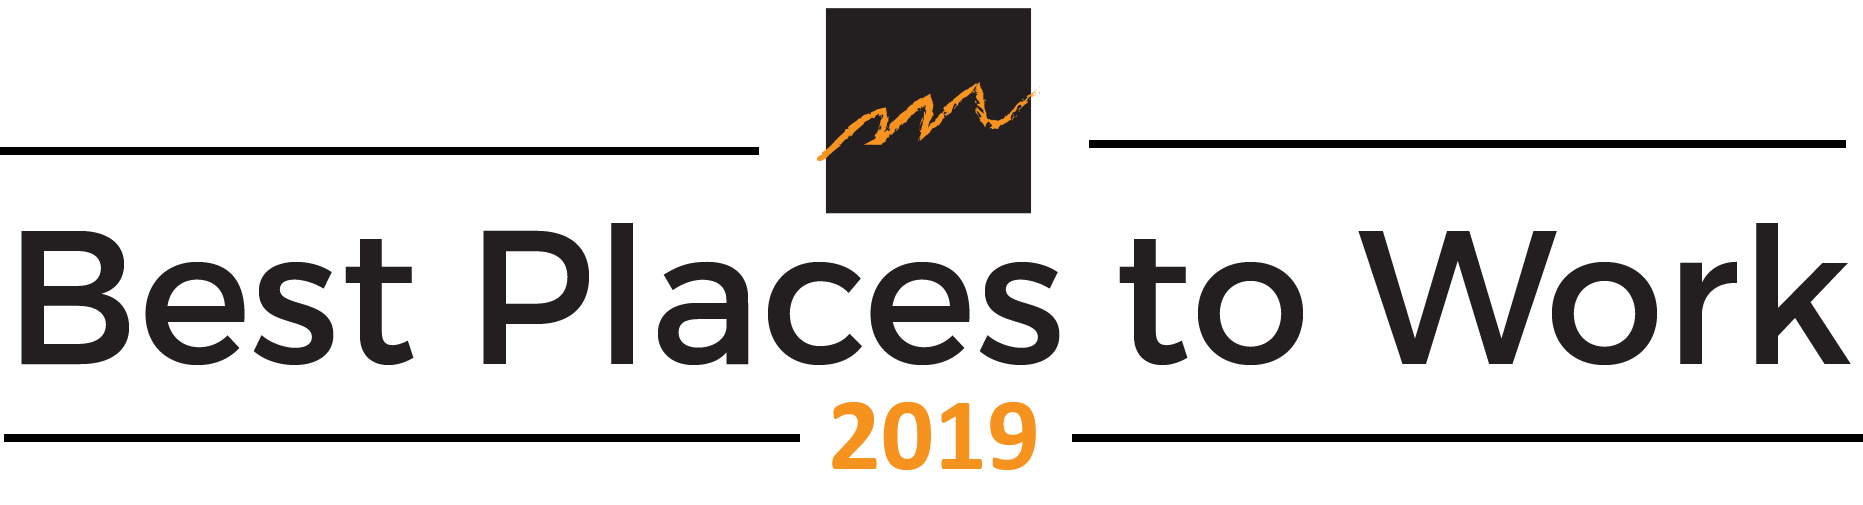 Moody Best Places to Work 2019 logo